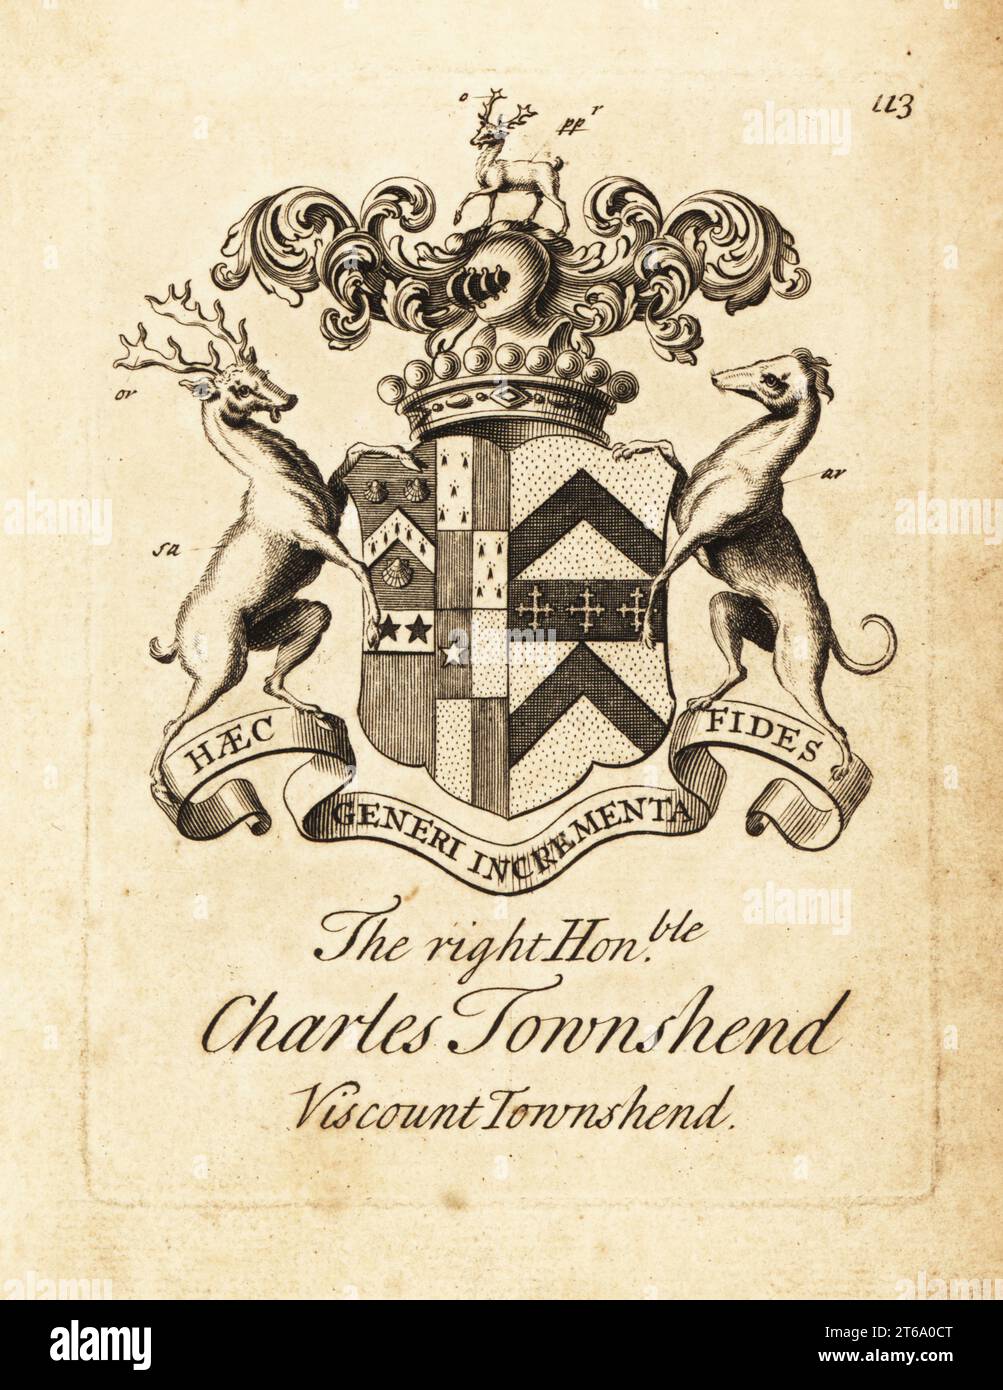 Coat of arms of the Right Honourable Charles Townshend, 2nd Viscount Townshend, 1674-1738. Copperplate engraving by Andrew Johnston after C. Gardiner from Notitia Anglicana, Shewing the Achievements of all the English Nobility, Andrew Johnson, the Strand, London, 1724. Stock Photo